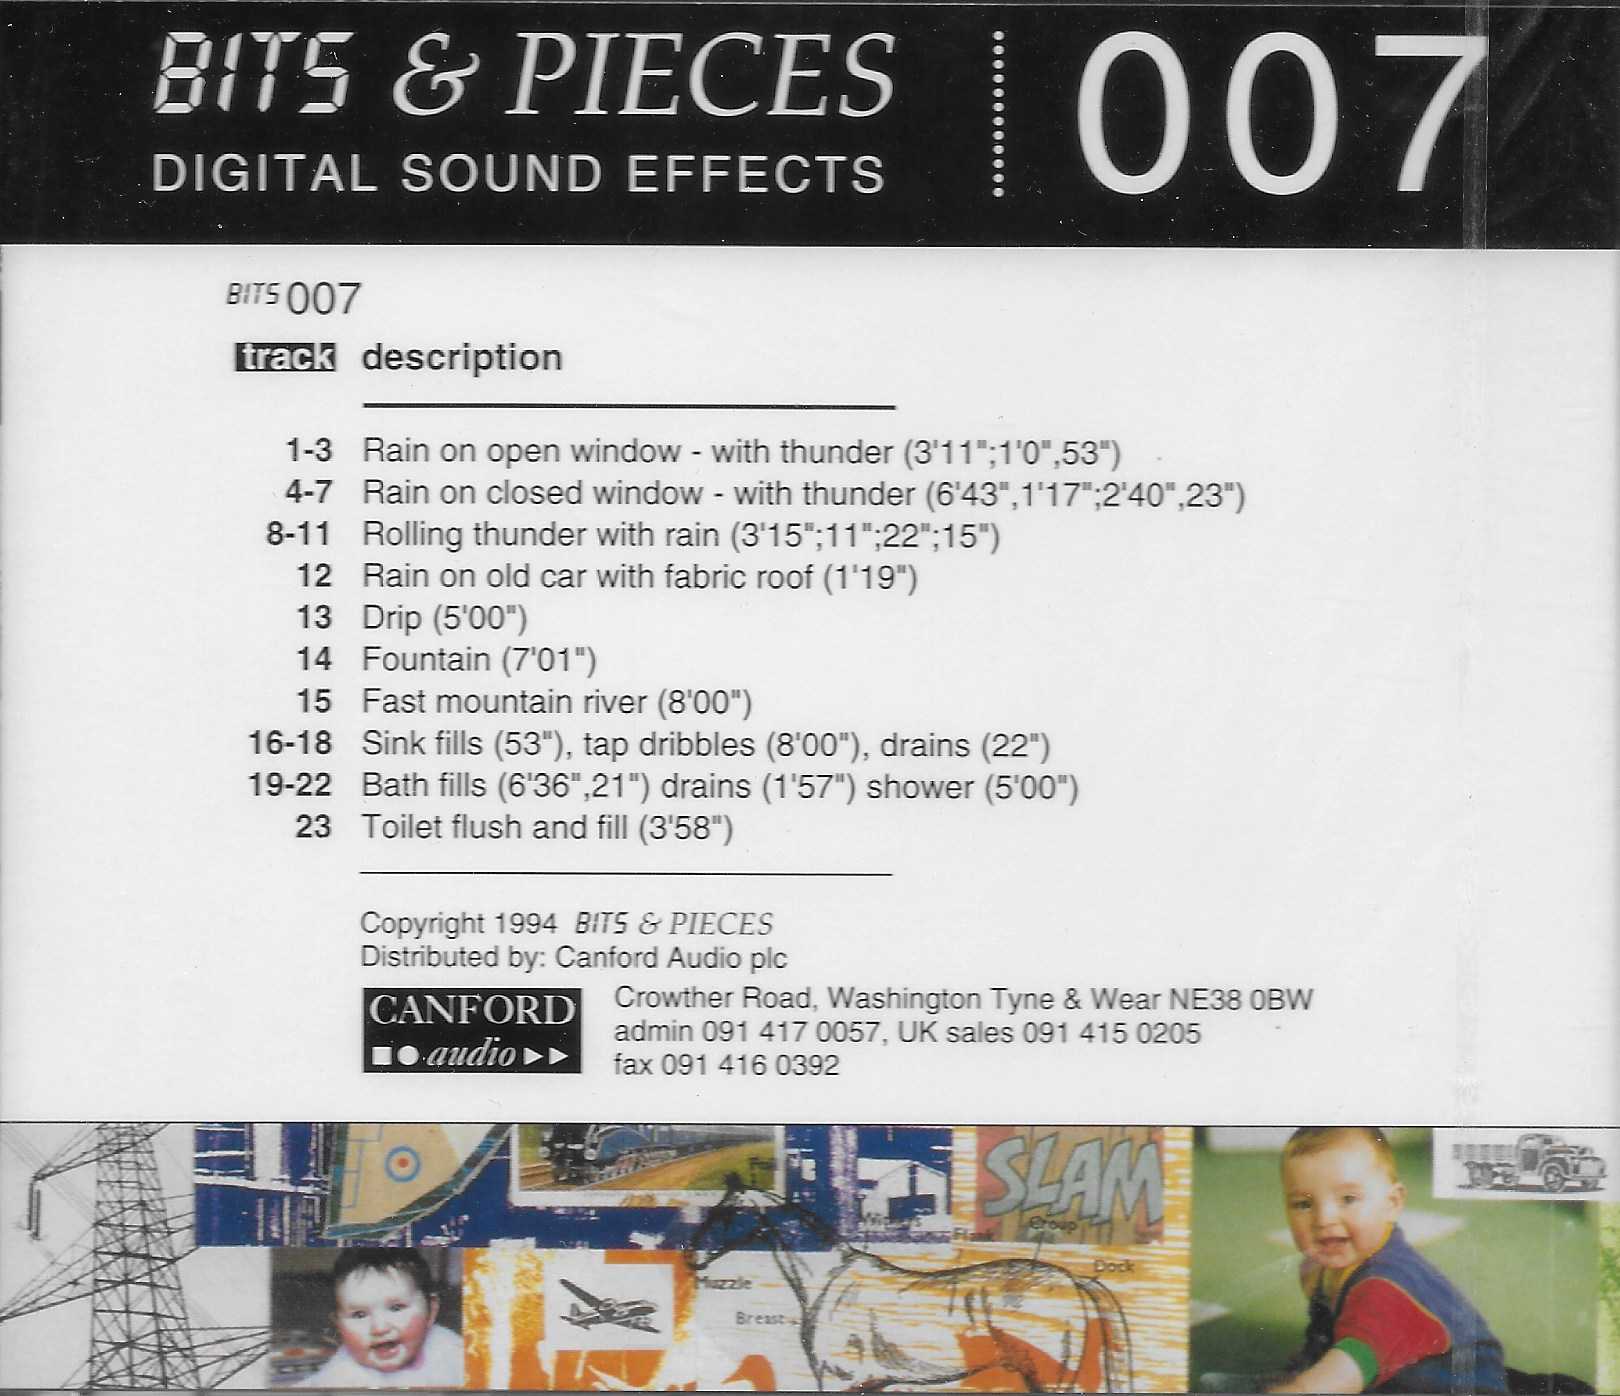 Picture of BITS 007 Bits & pieces digital sound effects 007 by artist Various from ITV, Channel 4 and Channel 5 library